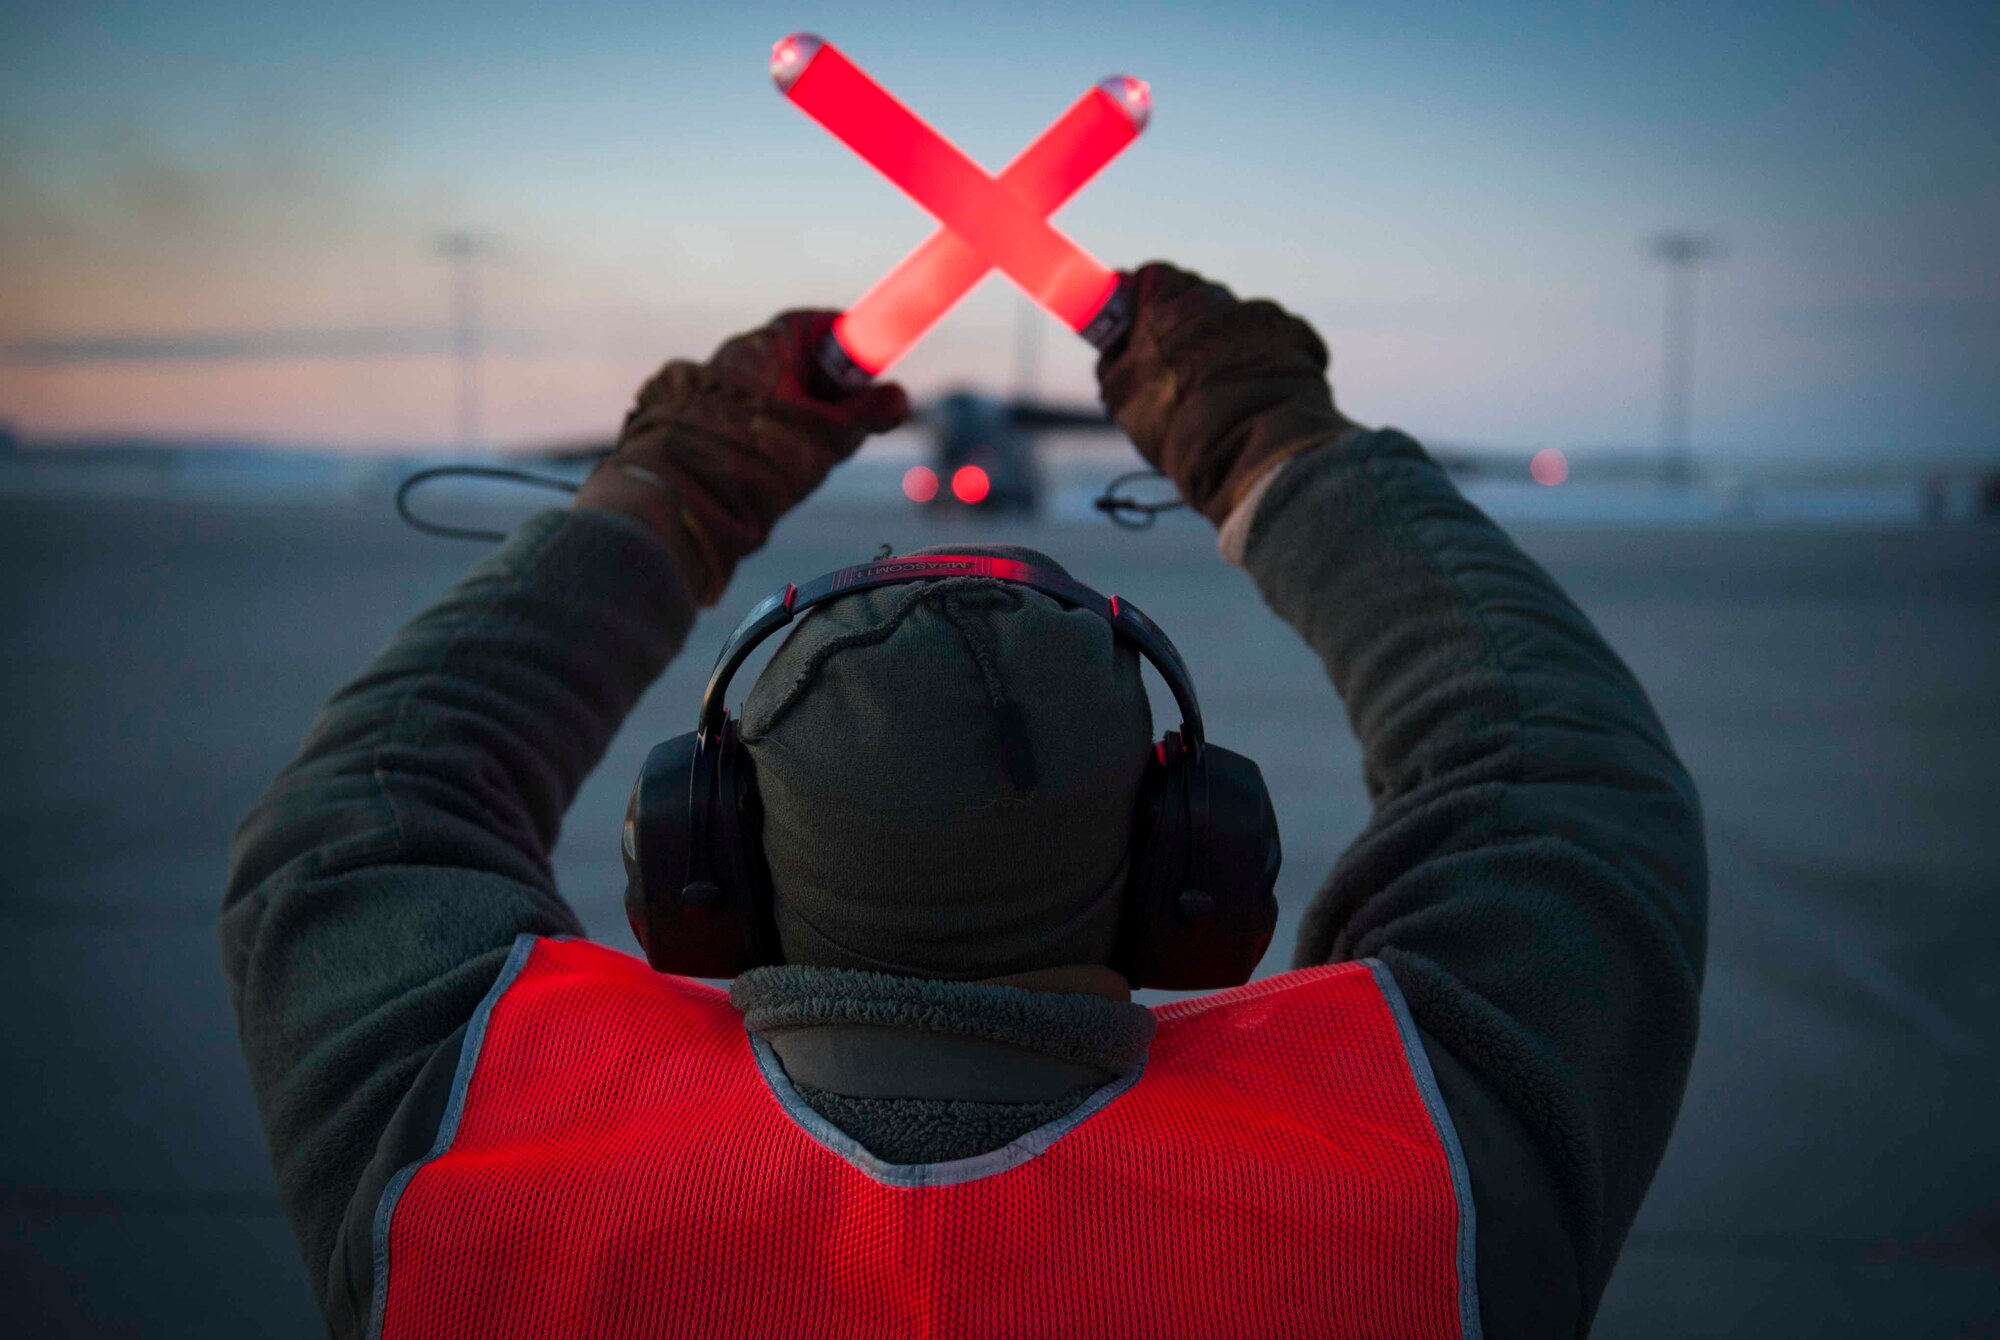 Senior Airman Taylor Lancaster, a 5th Aircraft Maintenance Squadron aircraft crew chief, guides a B-52H Stratofortress on Minot Air Force Base, N.D., Jan. 9, 2015. Lancaster’s main duty is to ensure his jet is fixed and prepared to take off before its flight time. (U.S. Air Force photo/Airman 1st Class Sahara L. Fales)
